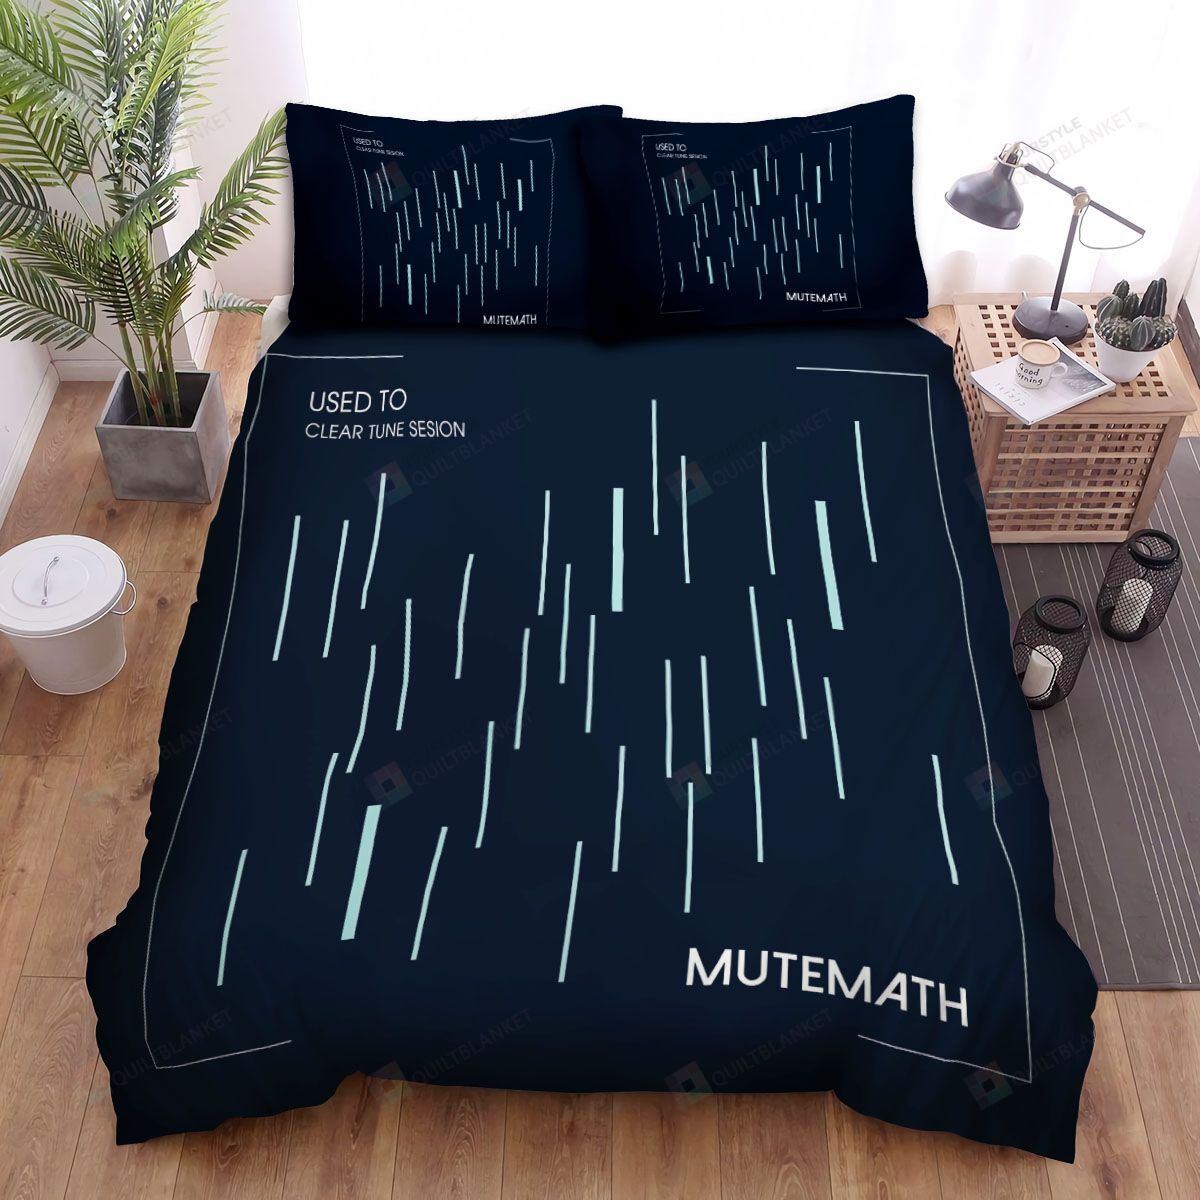 Mutemath Used To Bed Sheets Spread Comforter Duvet Cover Bedding Sets